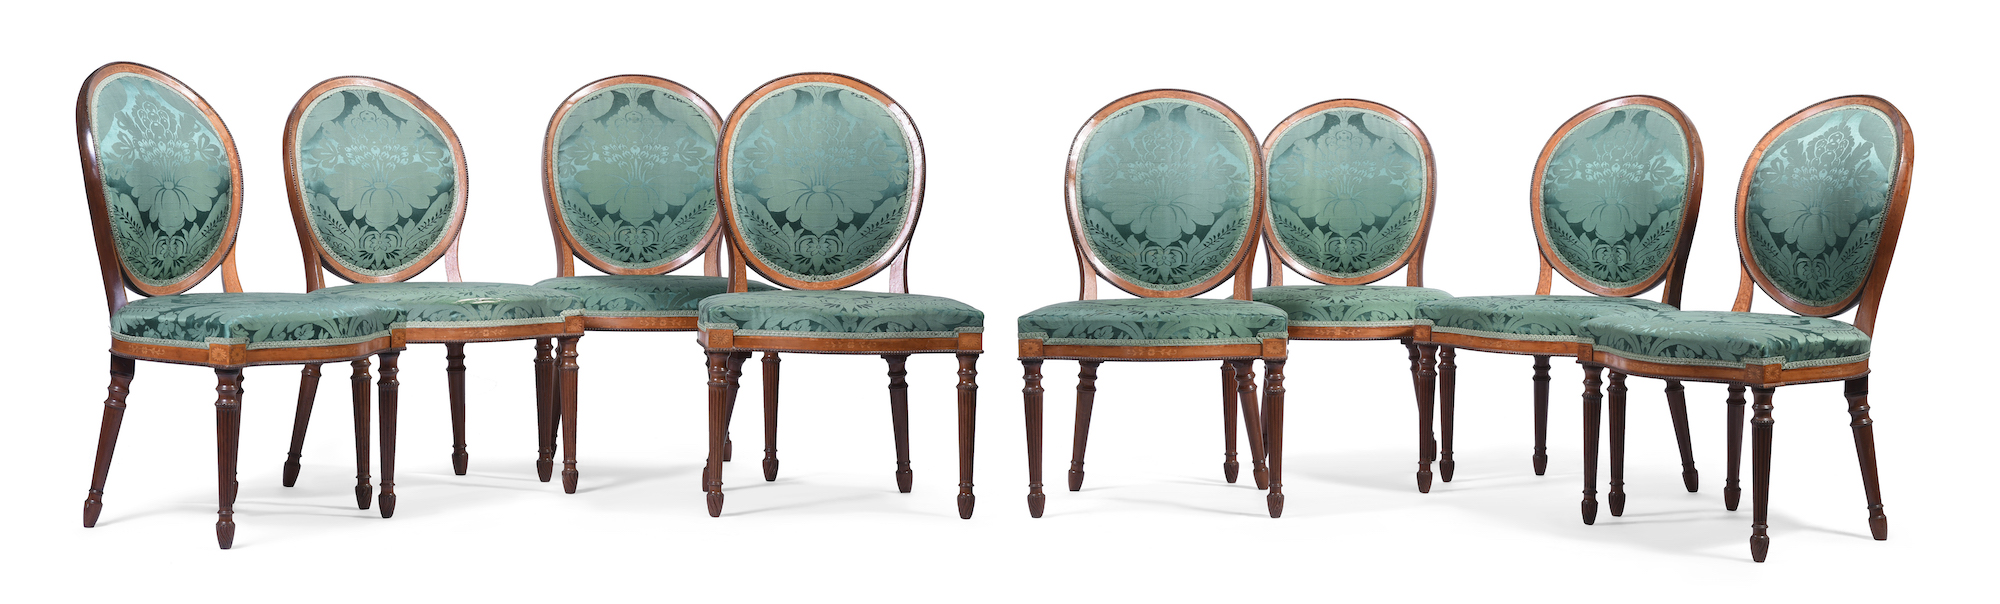 A set of eight George III chairs in the manner of John Linnell